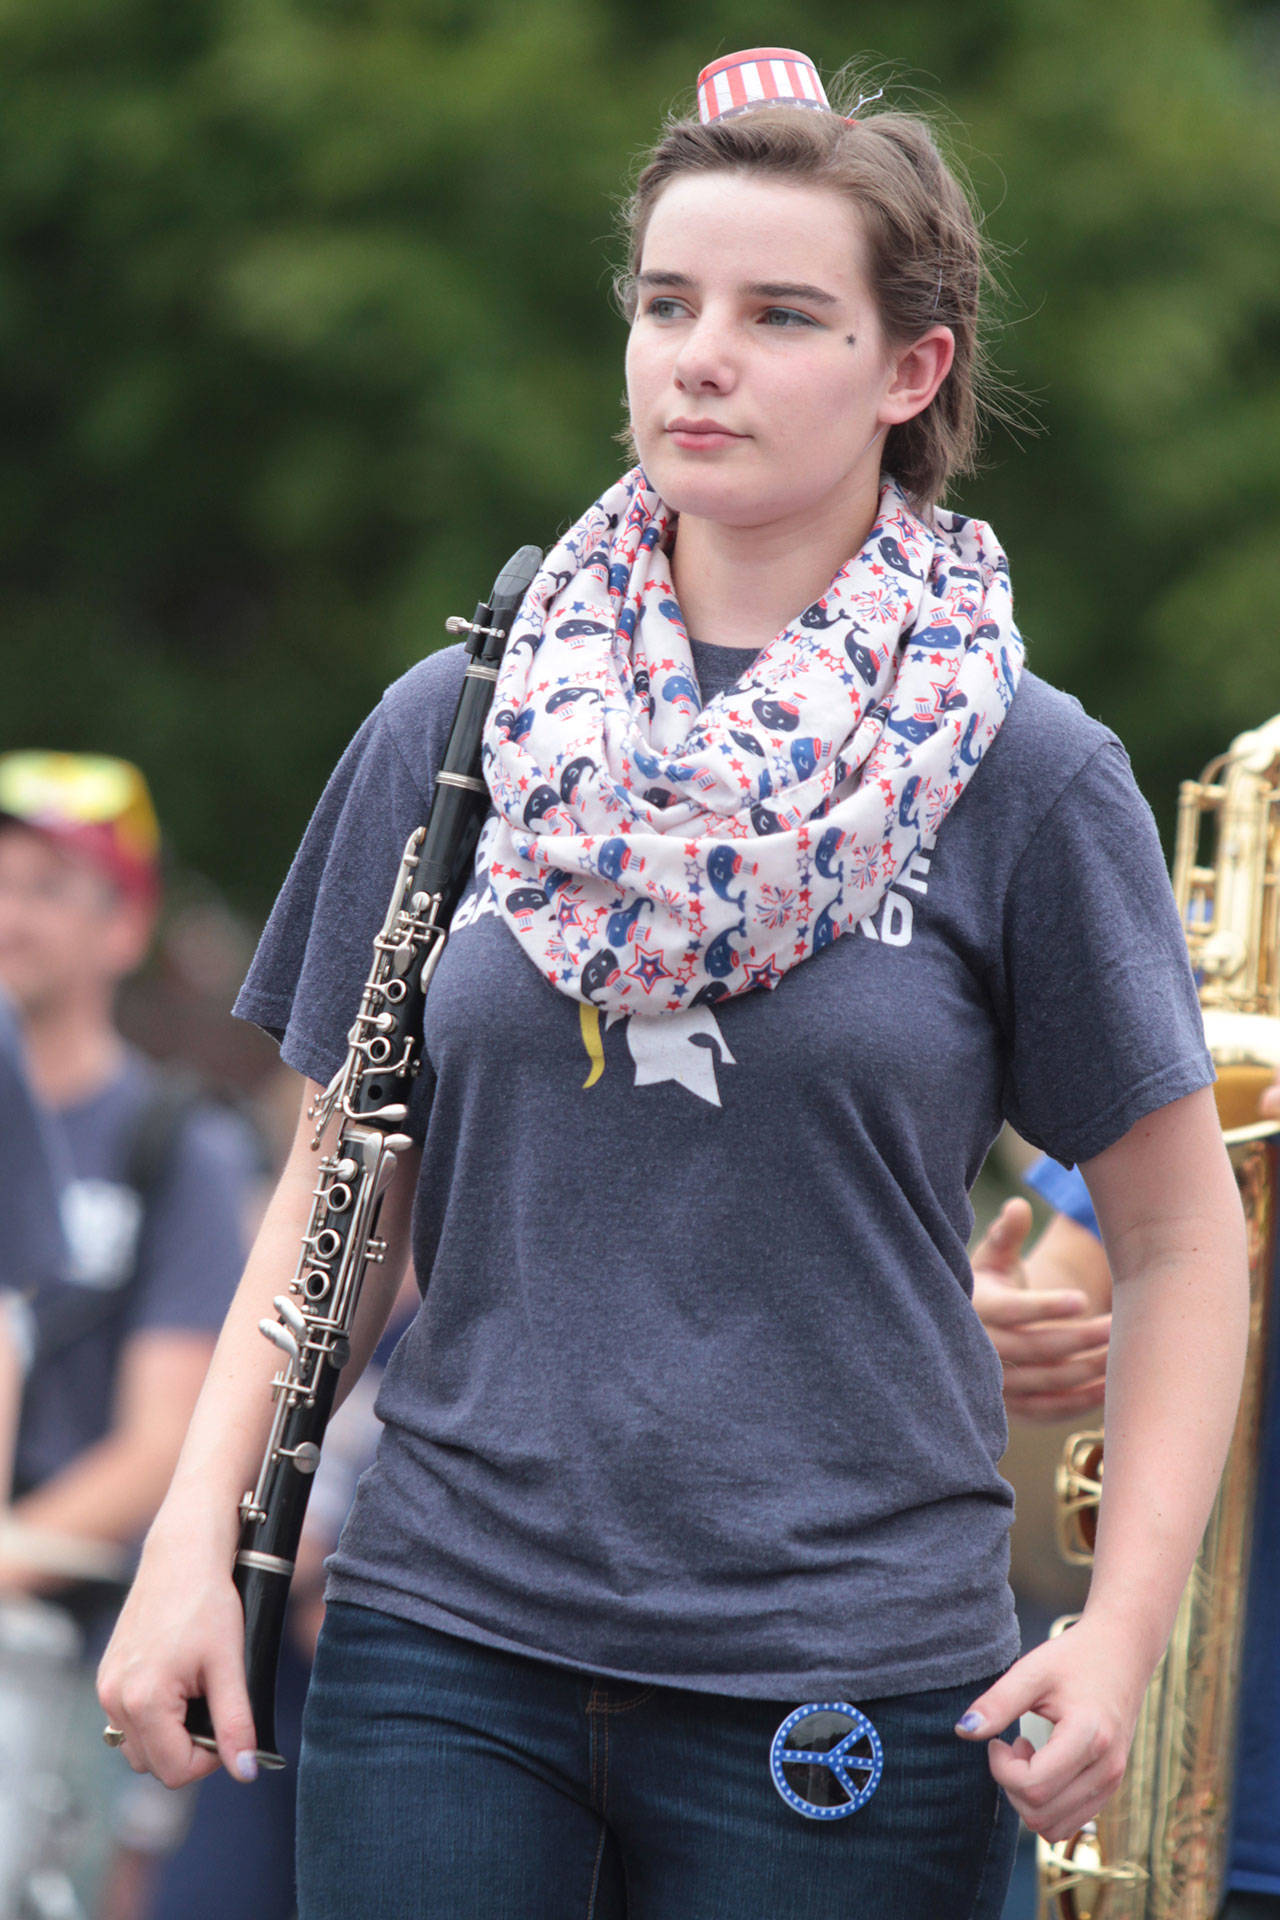 A member of the Bainbridge High School Marching Band marches in this year’s Fourth of July parade. (Brian Kelly | Bainbridge Island Review)